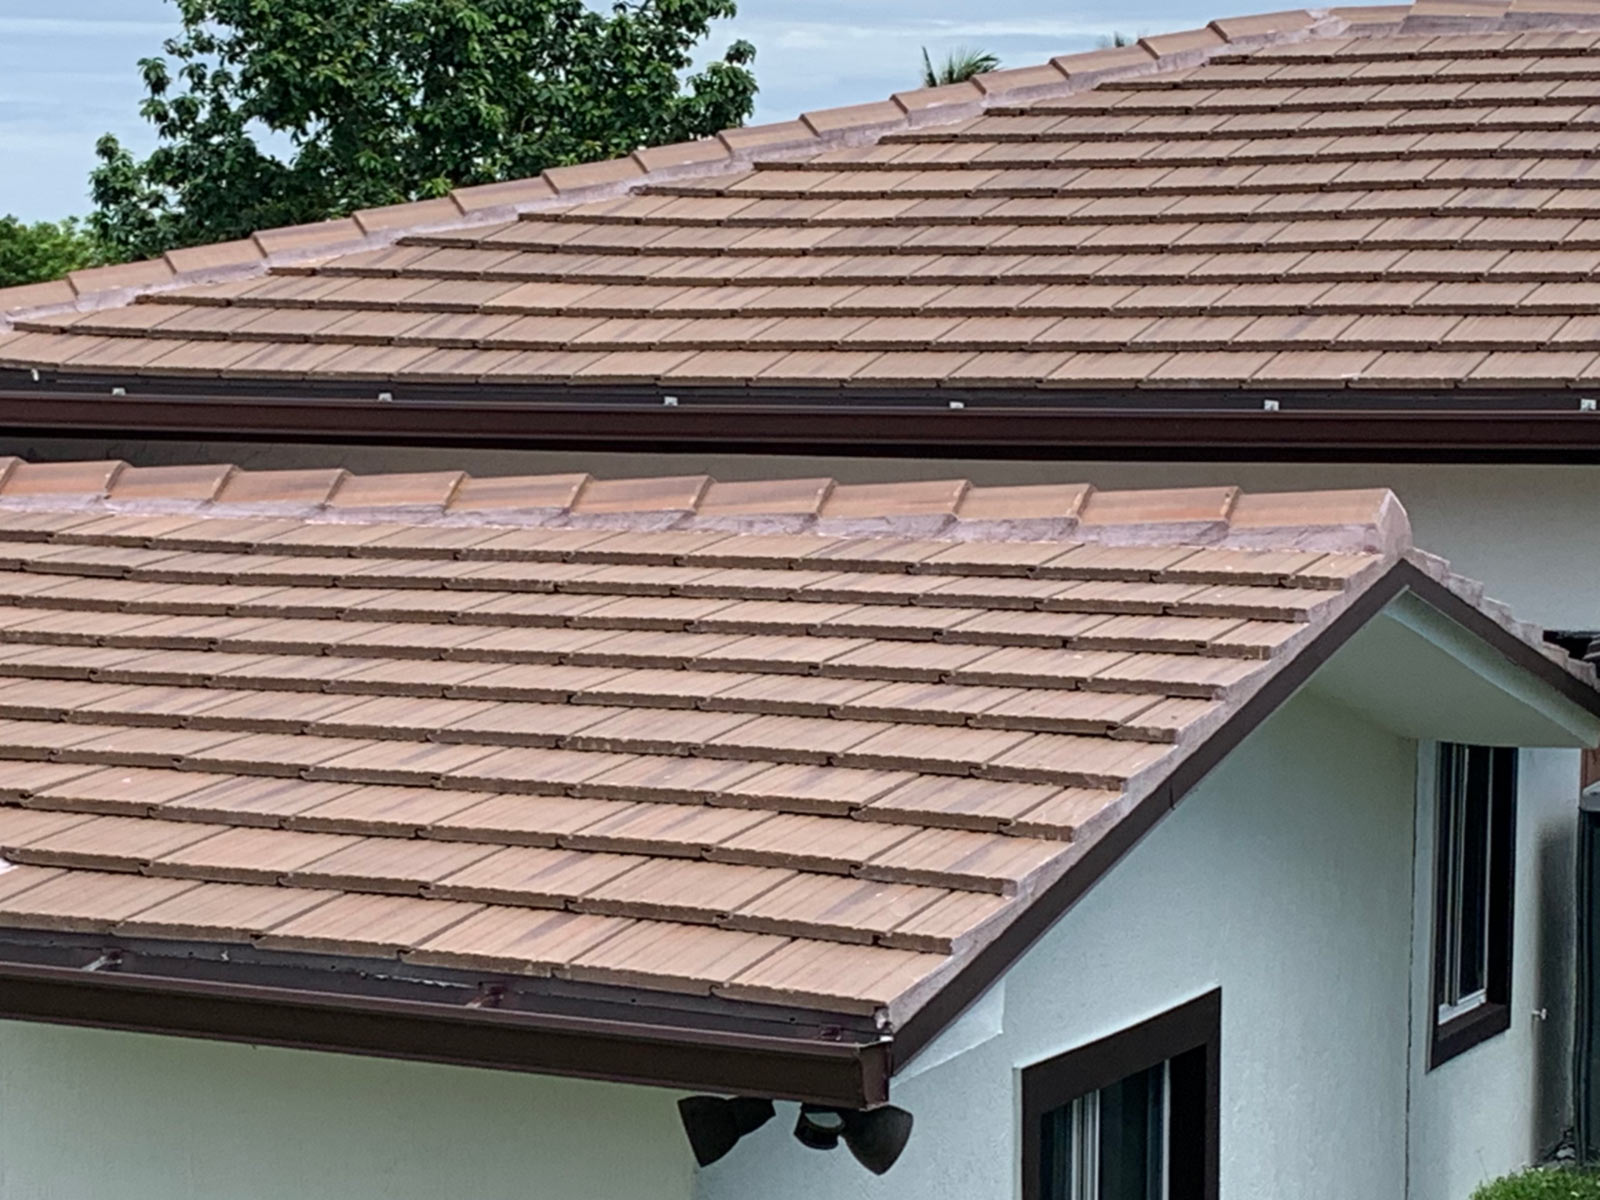 Roof Repairs & New Roofs in Miami Blended Concrete Roof Tile